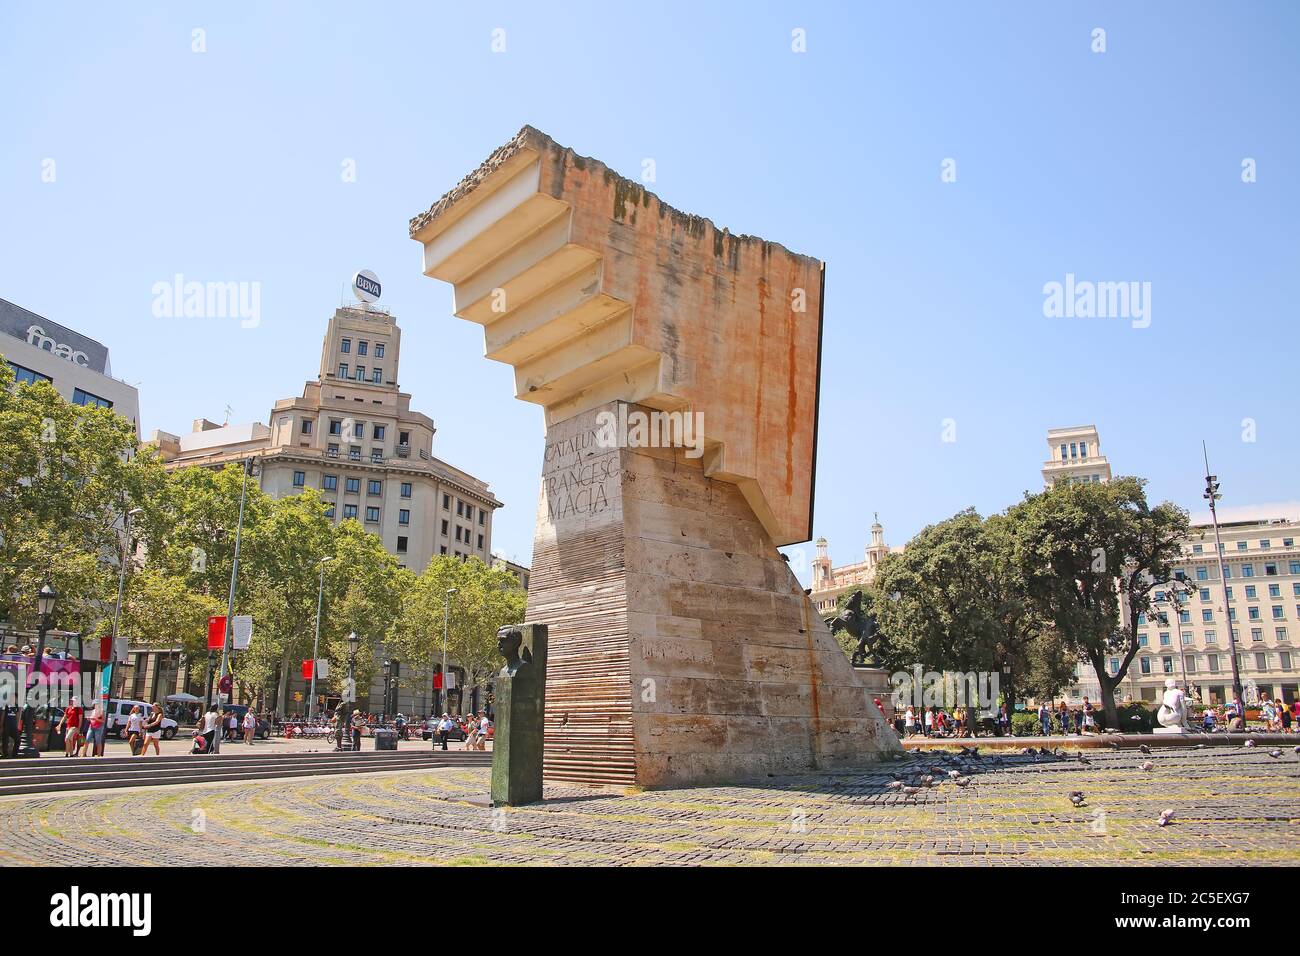 Beautiful sculpture at the center of the city in the downtown area, Placa de Catalunya or Catalonia Square, Barcelona, Spain. Stock Photo